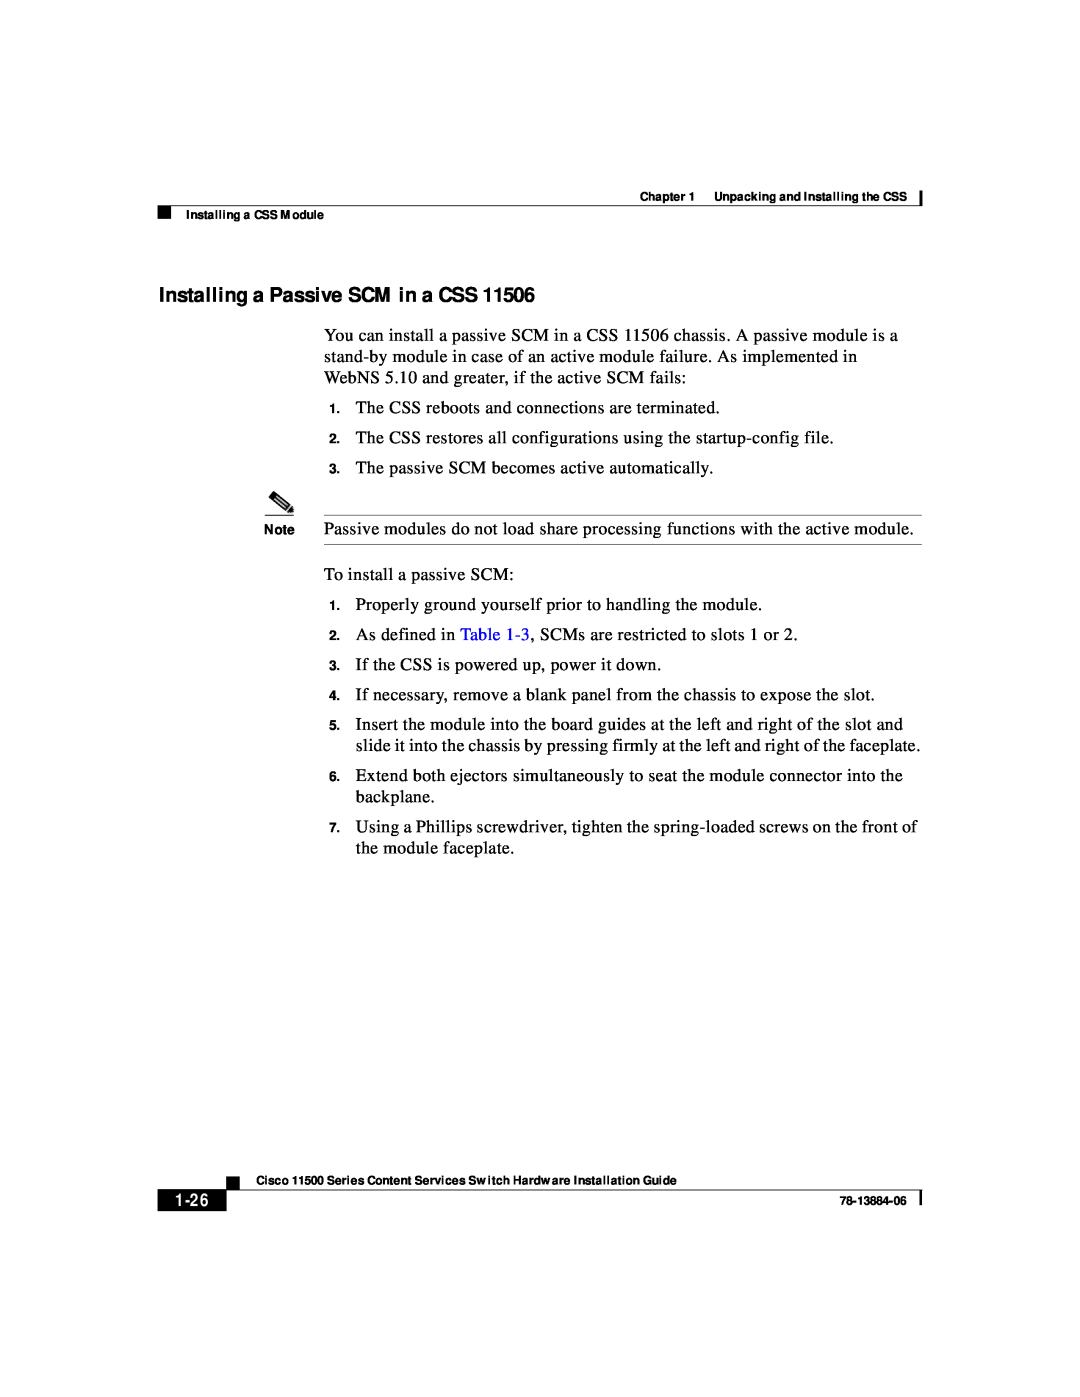 Cisco Systems 11500 Series manual Installing a Passive SCM in a CSS, 1-26 